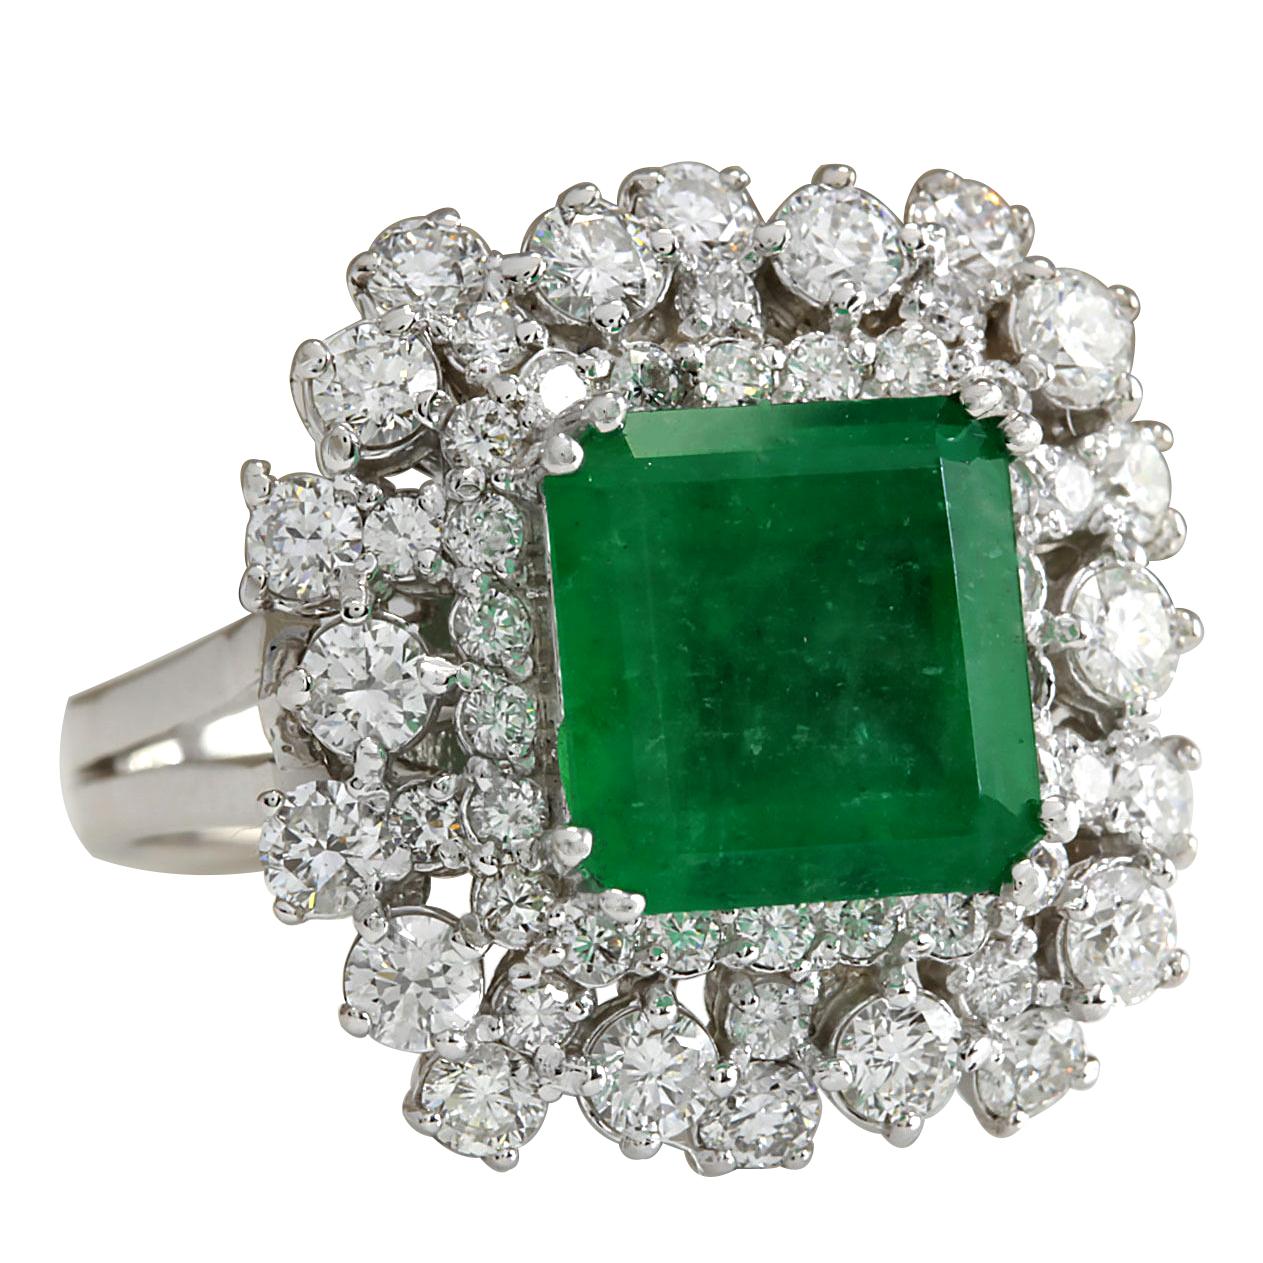 Introducing our breathtaking 6.91 Carat Emerald 14 Karat White Gold Diamond Ring.

Crafted with meticulous attention to detail, this ring is expertly stamped with 14K White Gold authenticity, weighing a total of 10.5 grams.

At its heart lies a